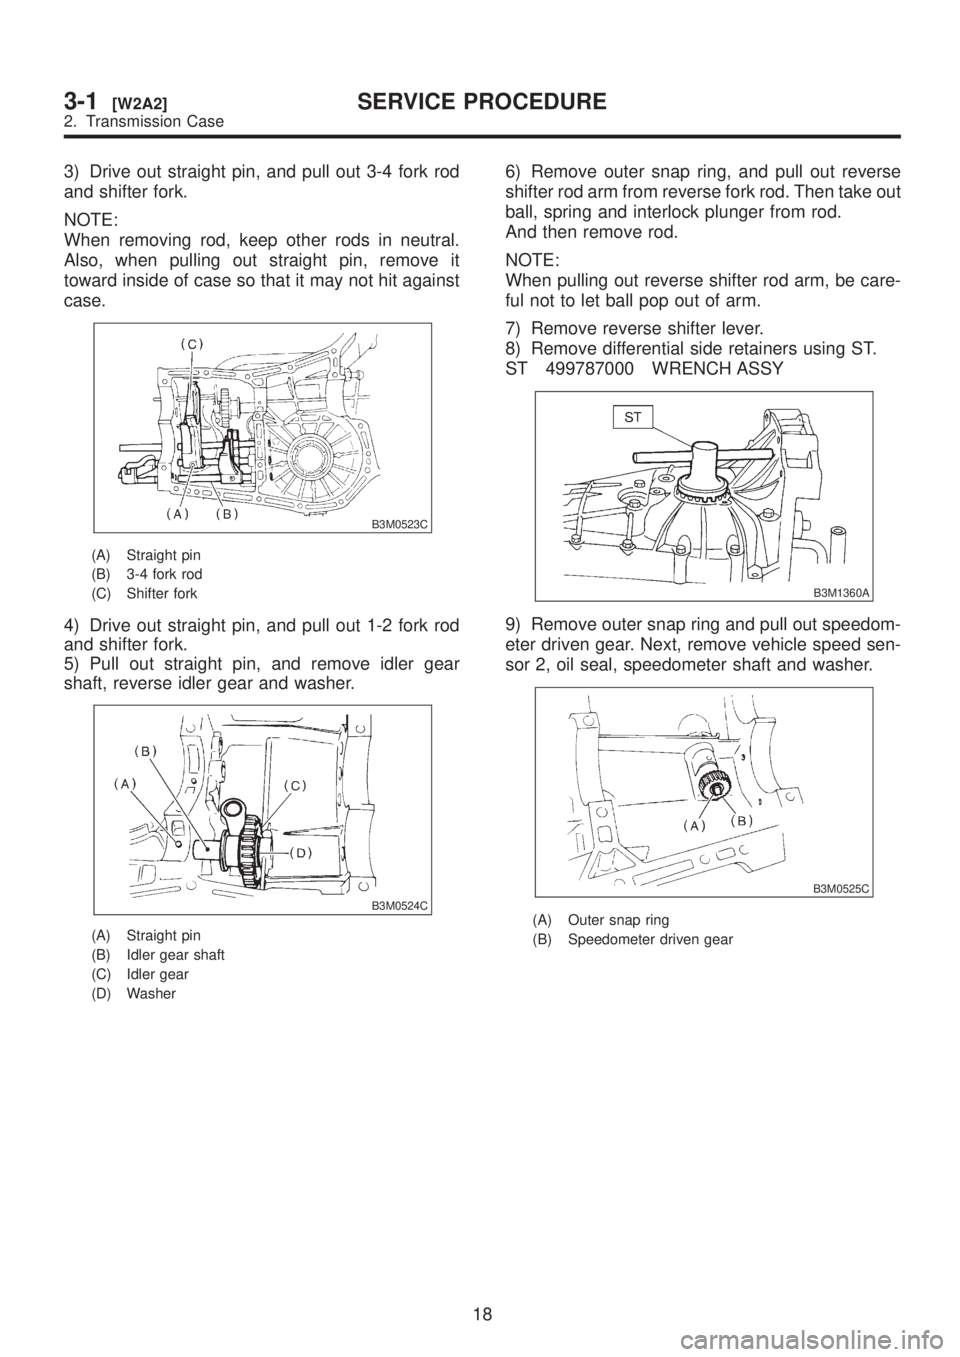 SUBARU LEGACY 1999  Service Repair Manual 3) Drive out straight pin, and pull out 3-4 fork rod
and shifter fork.
NOTE:
When removing rod, keep other rods in neutral.
Also, when pulling out straight pin, remove it
toward inside of case so that